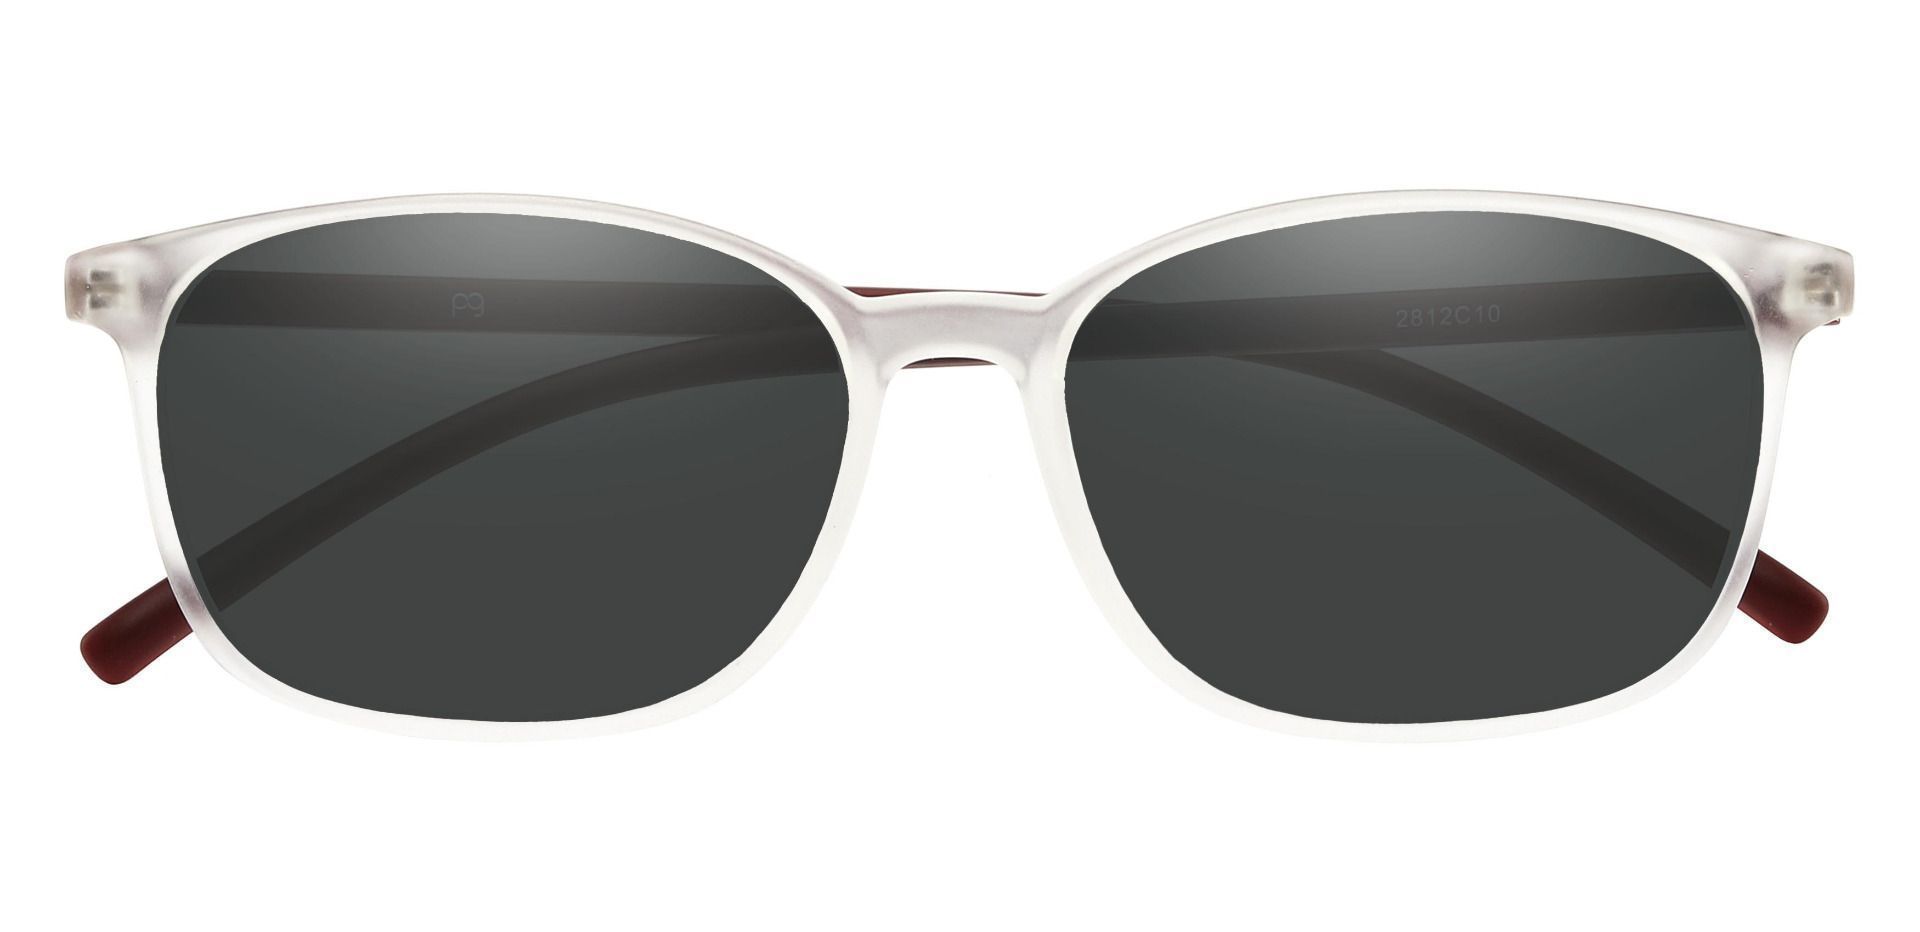 Onyx Square Lined Bifocal Sunglasses - Clear Frame With Gray Lenses